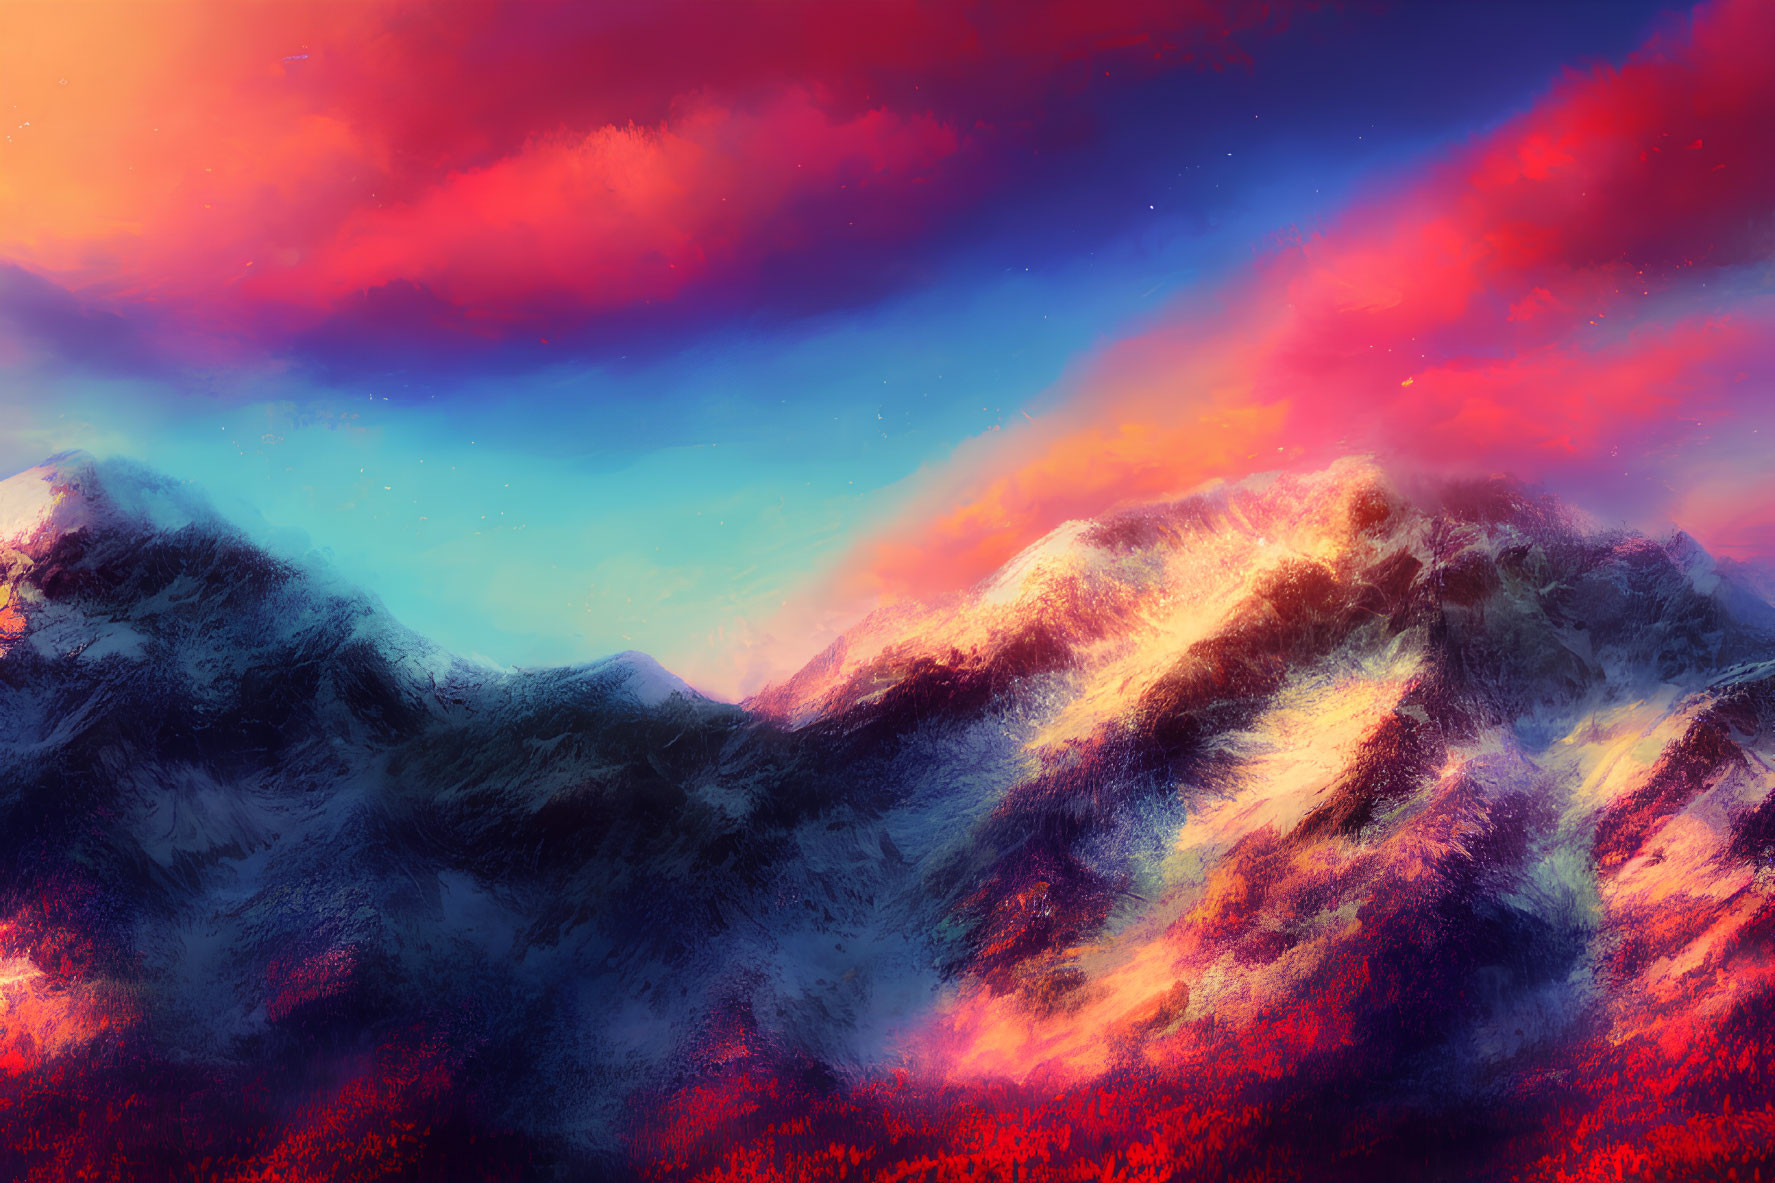 Colorful sunset sky over snowy mountains and autumn forest.